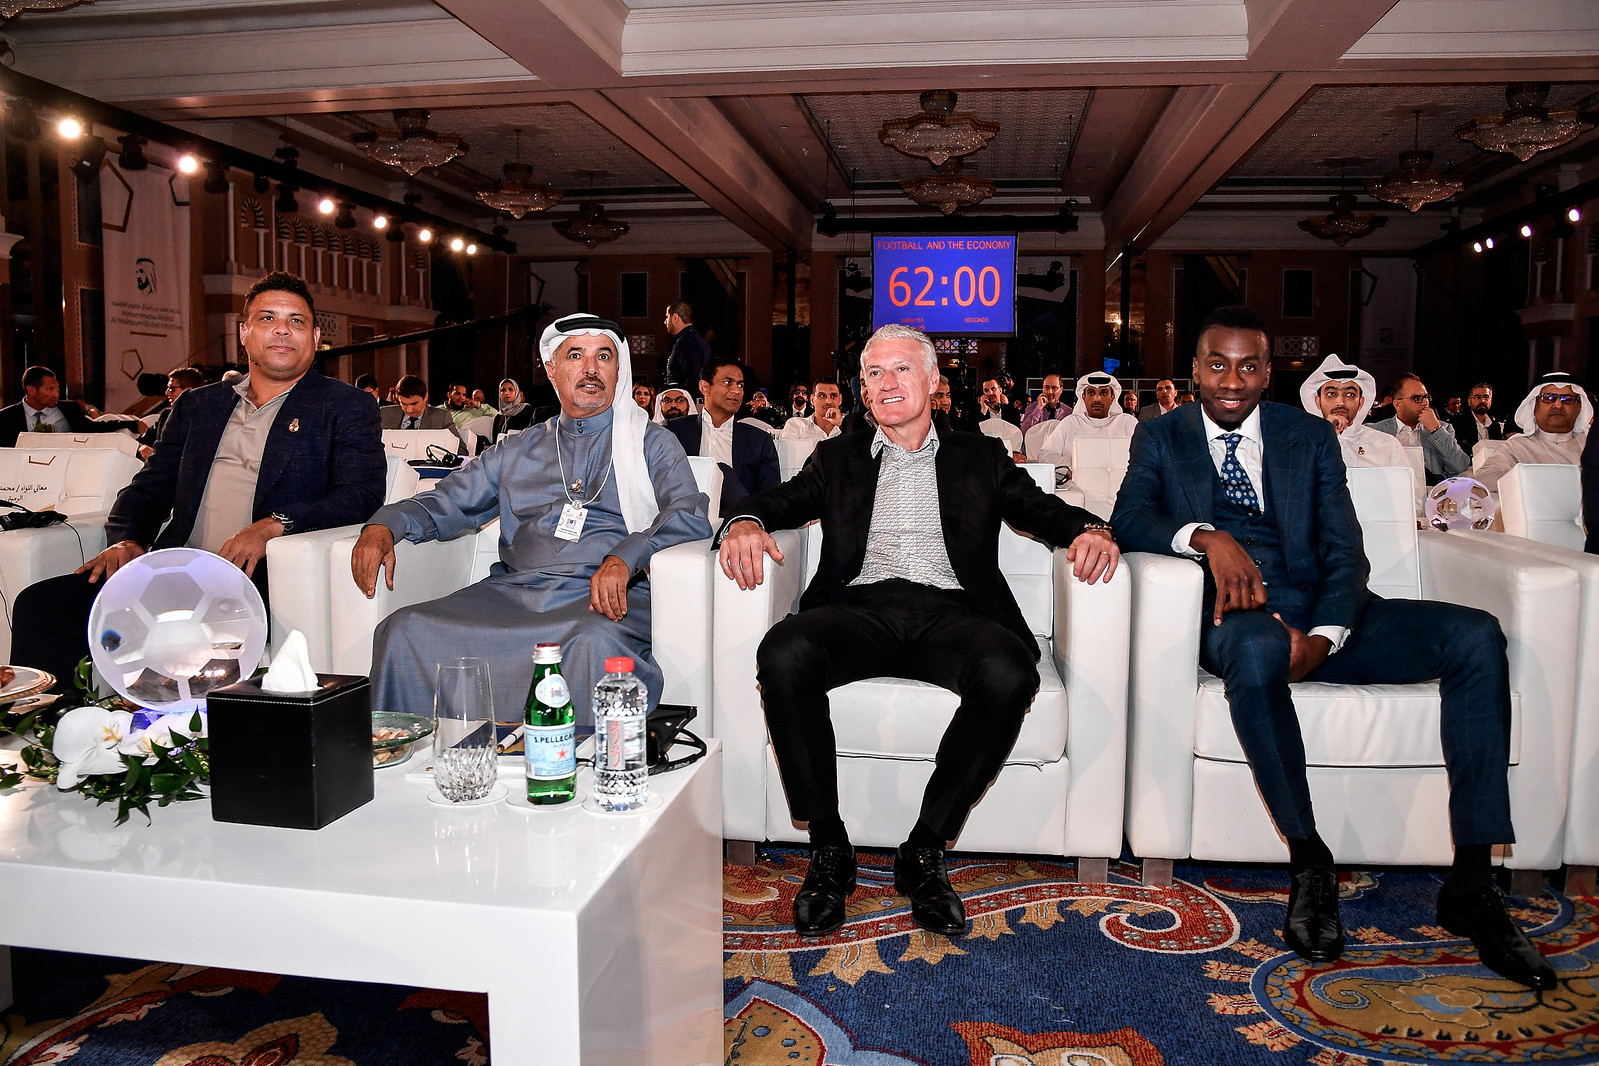 13th edition of the Dubai International Sports Conference